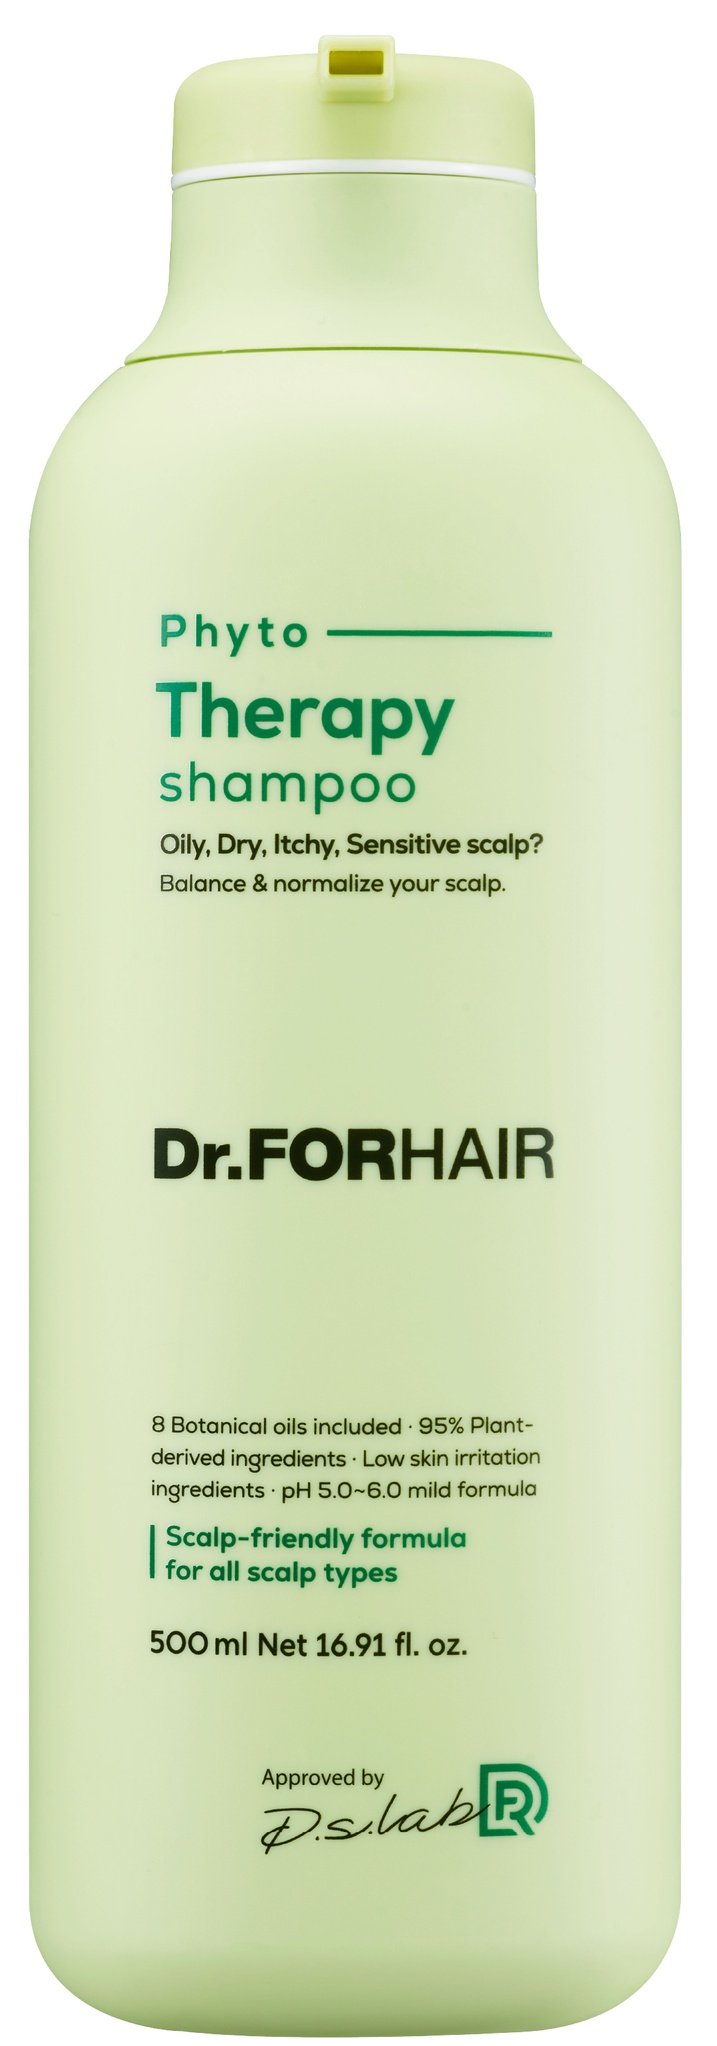 Dr.ForHair Dr. Forhair Phyto Therapy Shampoo